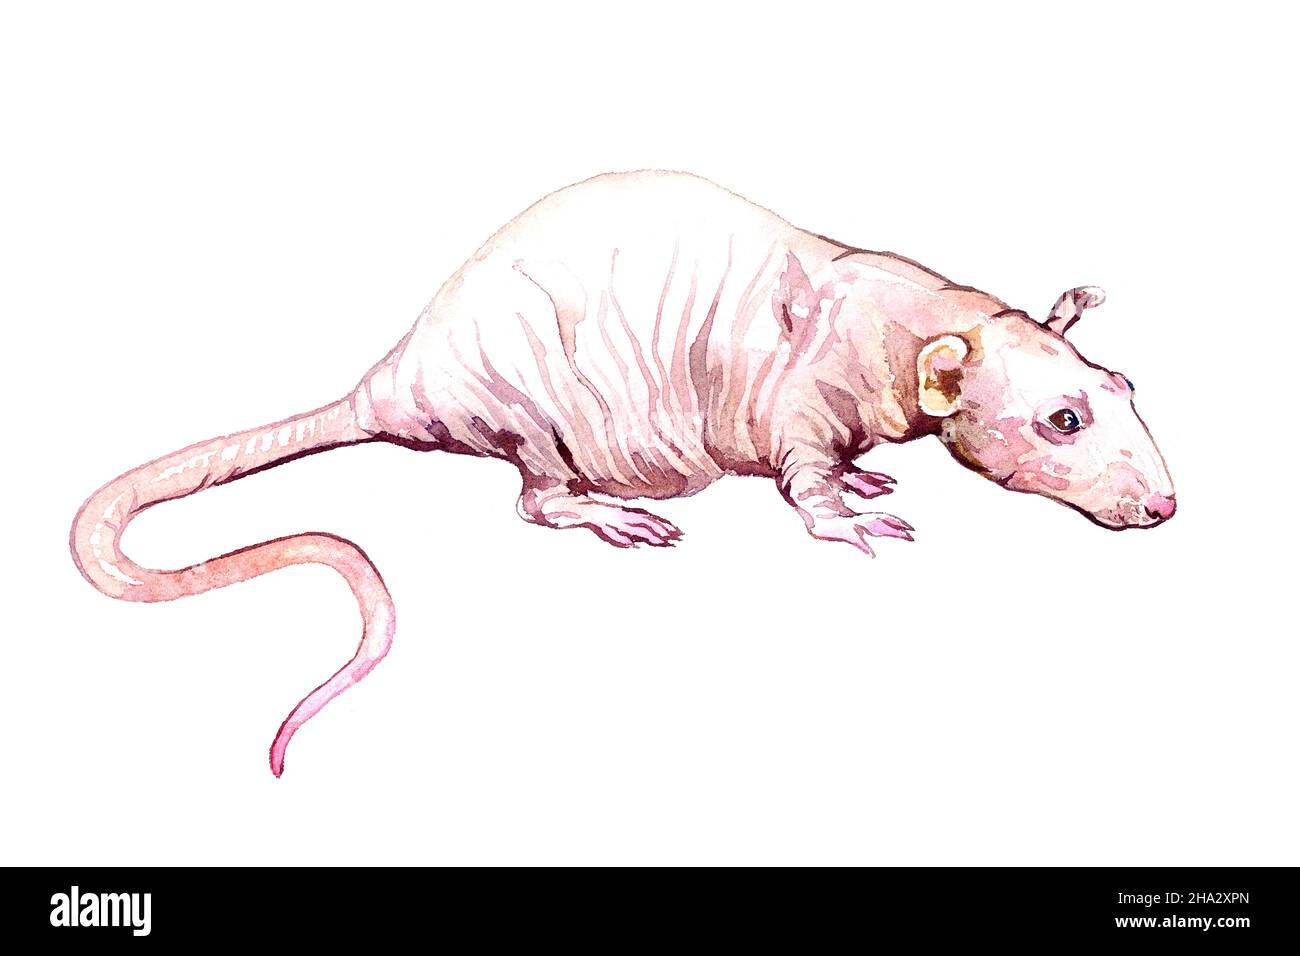 Hairless (fancy, Rattus norvegicus domestica) rat side view, hand painted watercolor illustration Stock Photo